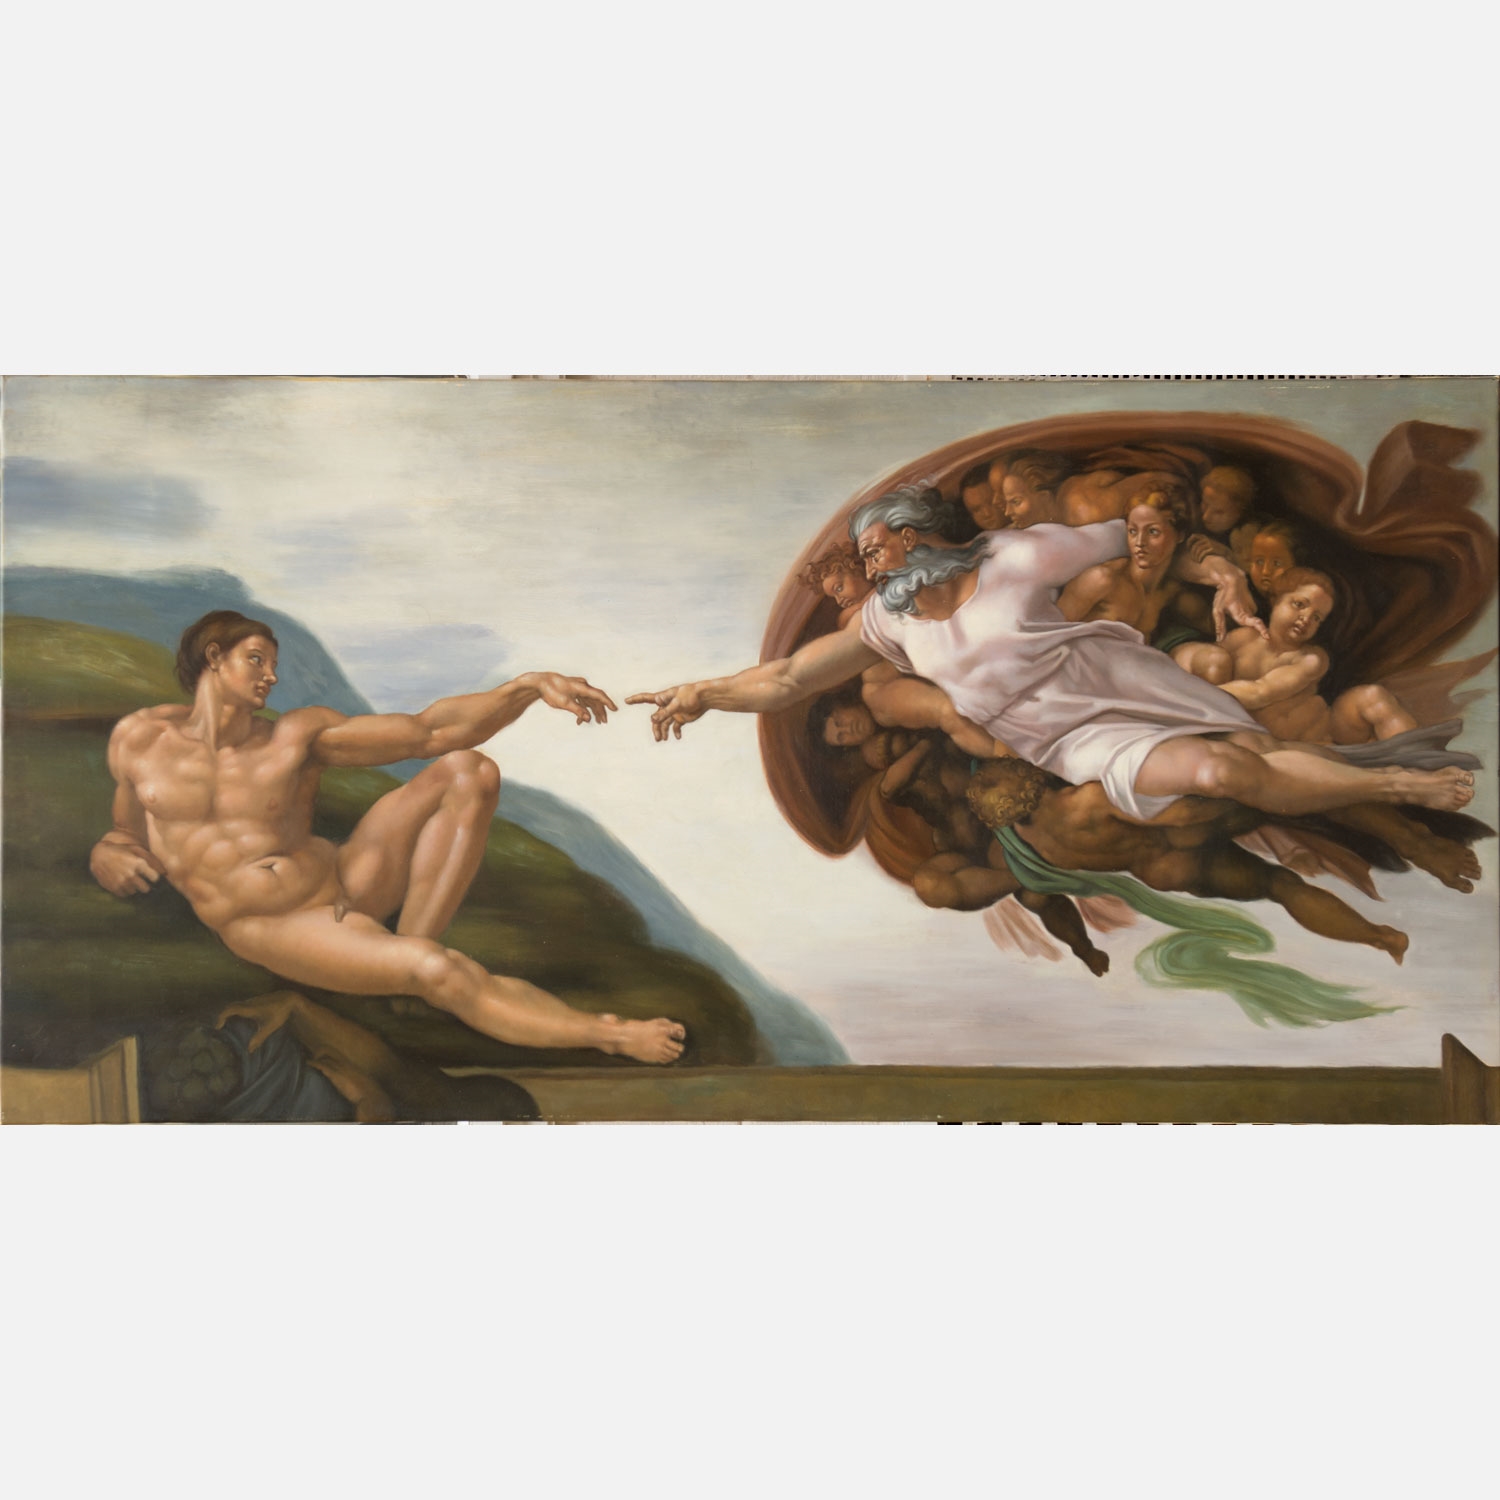 The creation of Adam by Michelangelo